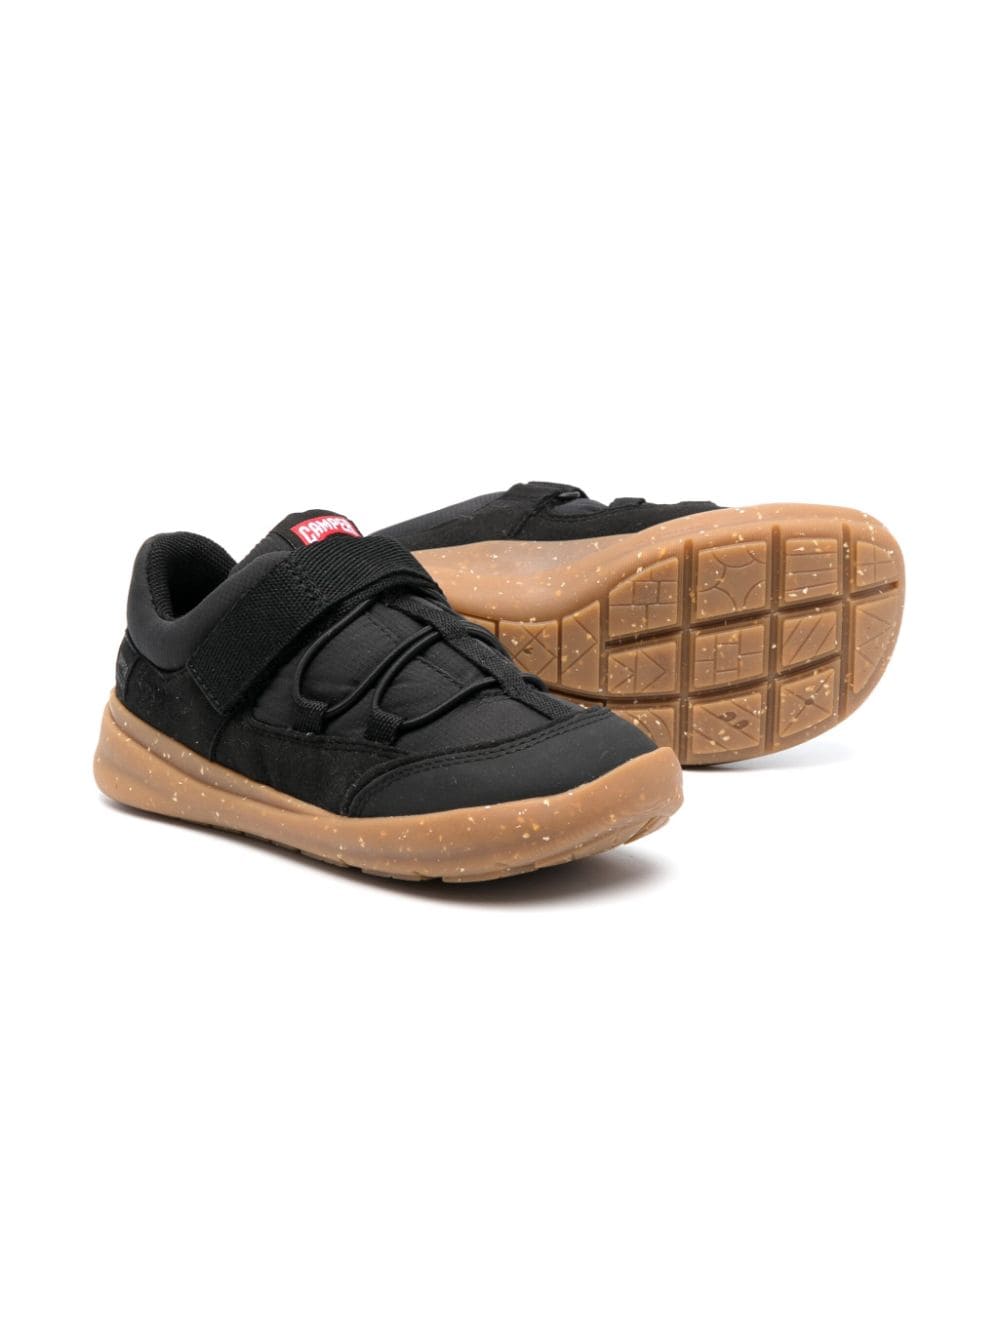 Image 2 of Camper Kids Ergo touch-strap sneakers